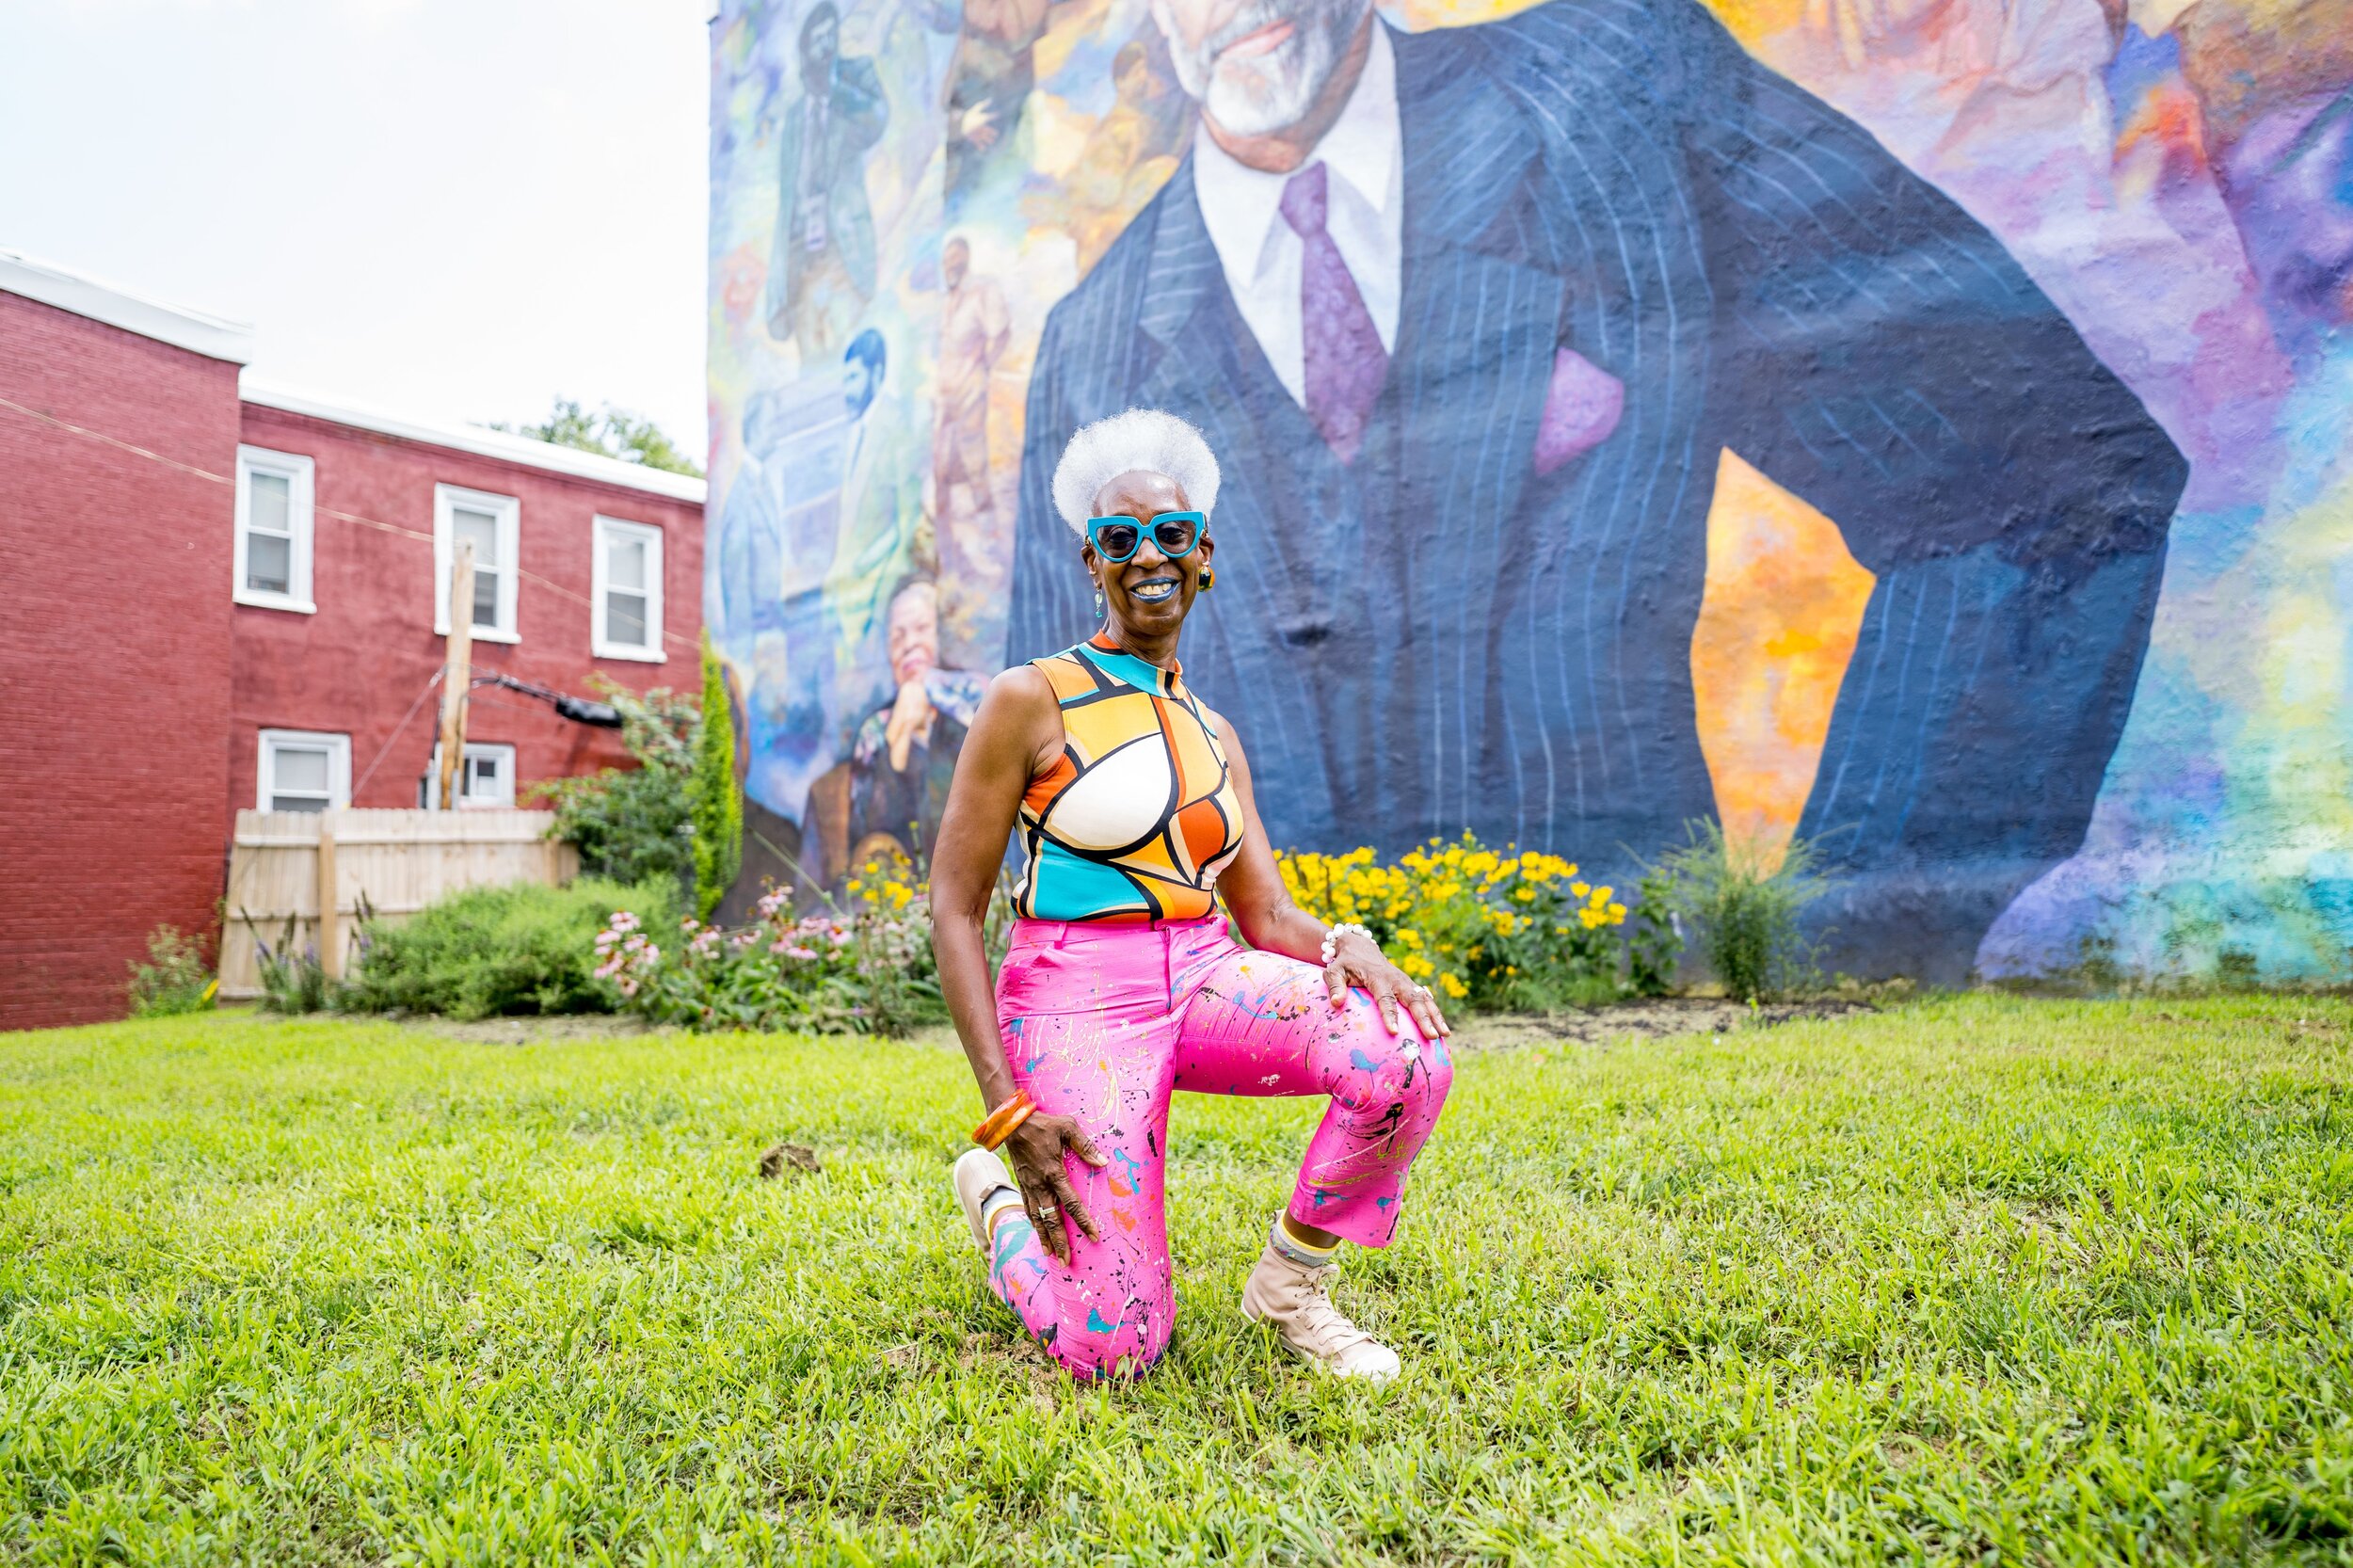 An example of a lot-turned pollinator garden and mural site at Wyalusing street and Belmont Avenue in West Philadelphia from the September issue of Grid. Read the story here.Photograph by Drew Dennis. Pictured: Sandra Calhoun.